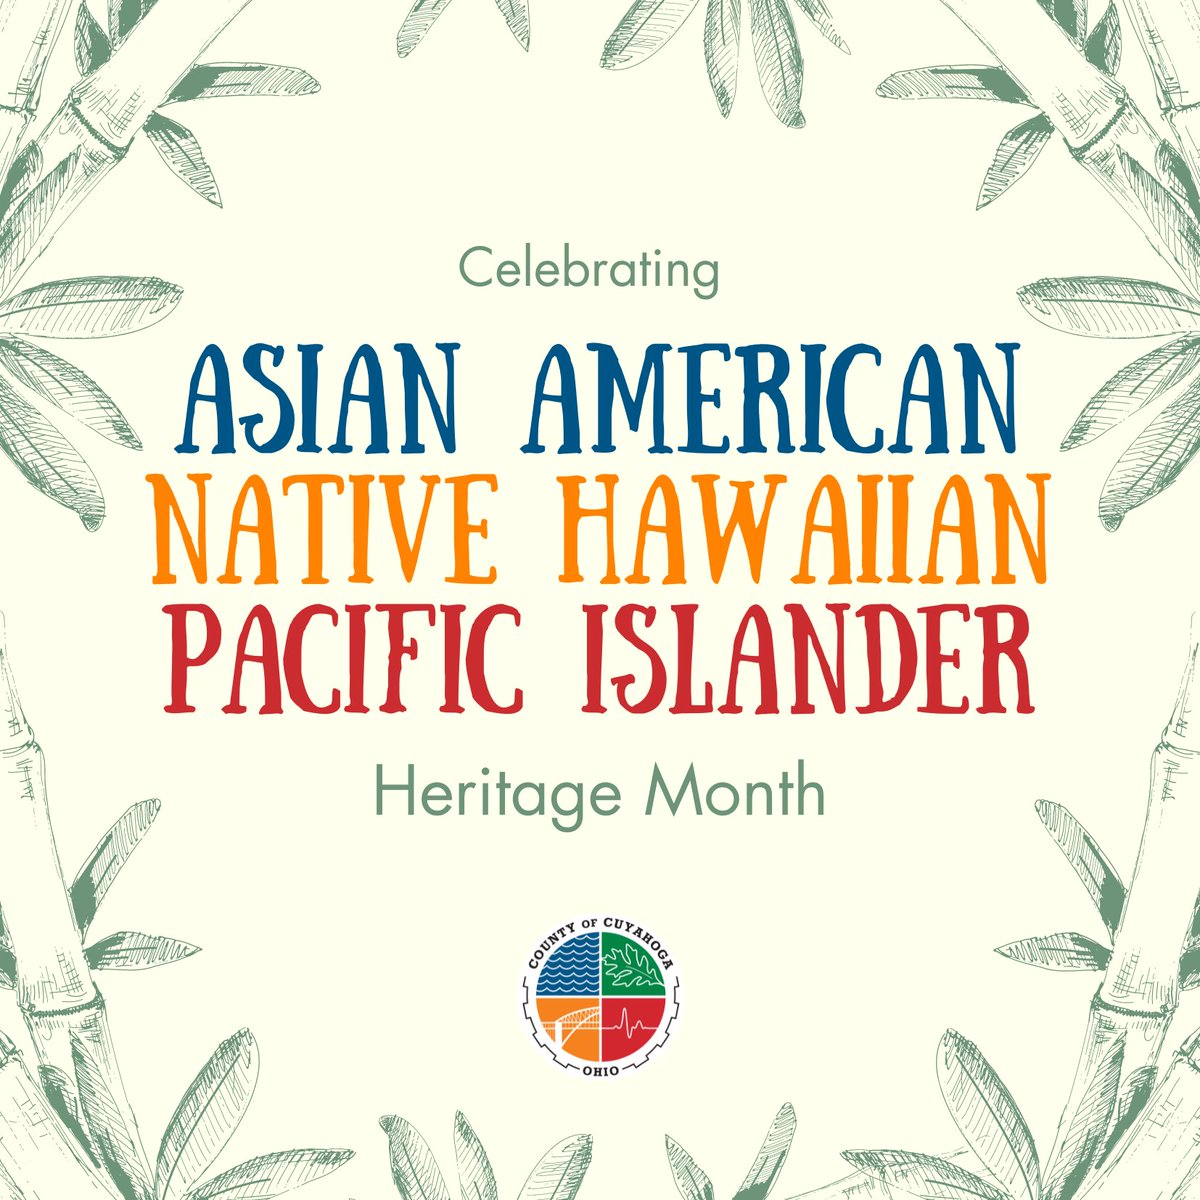 Here’s to honoring all the amazing contributions our neighbors of Asian American, Native Hawaiian and Pacific Islanders descent make to our communities this month and every month.